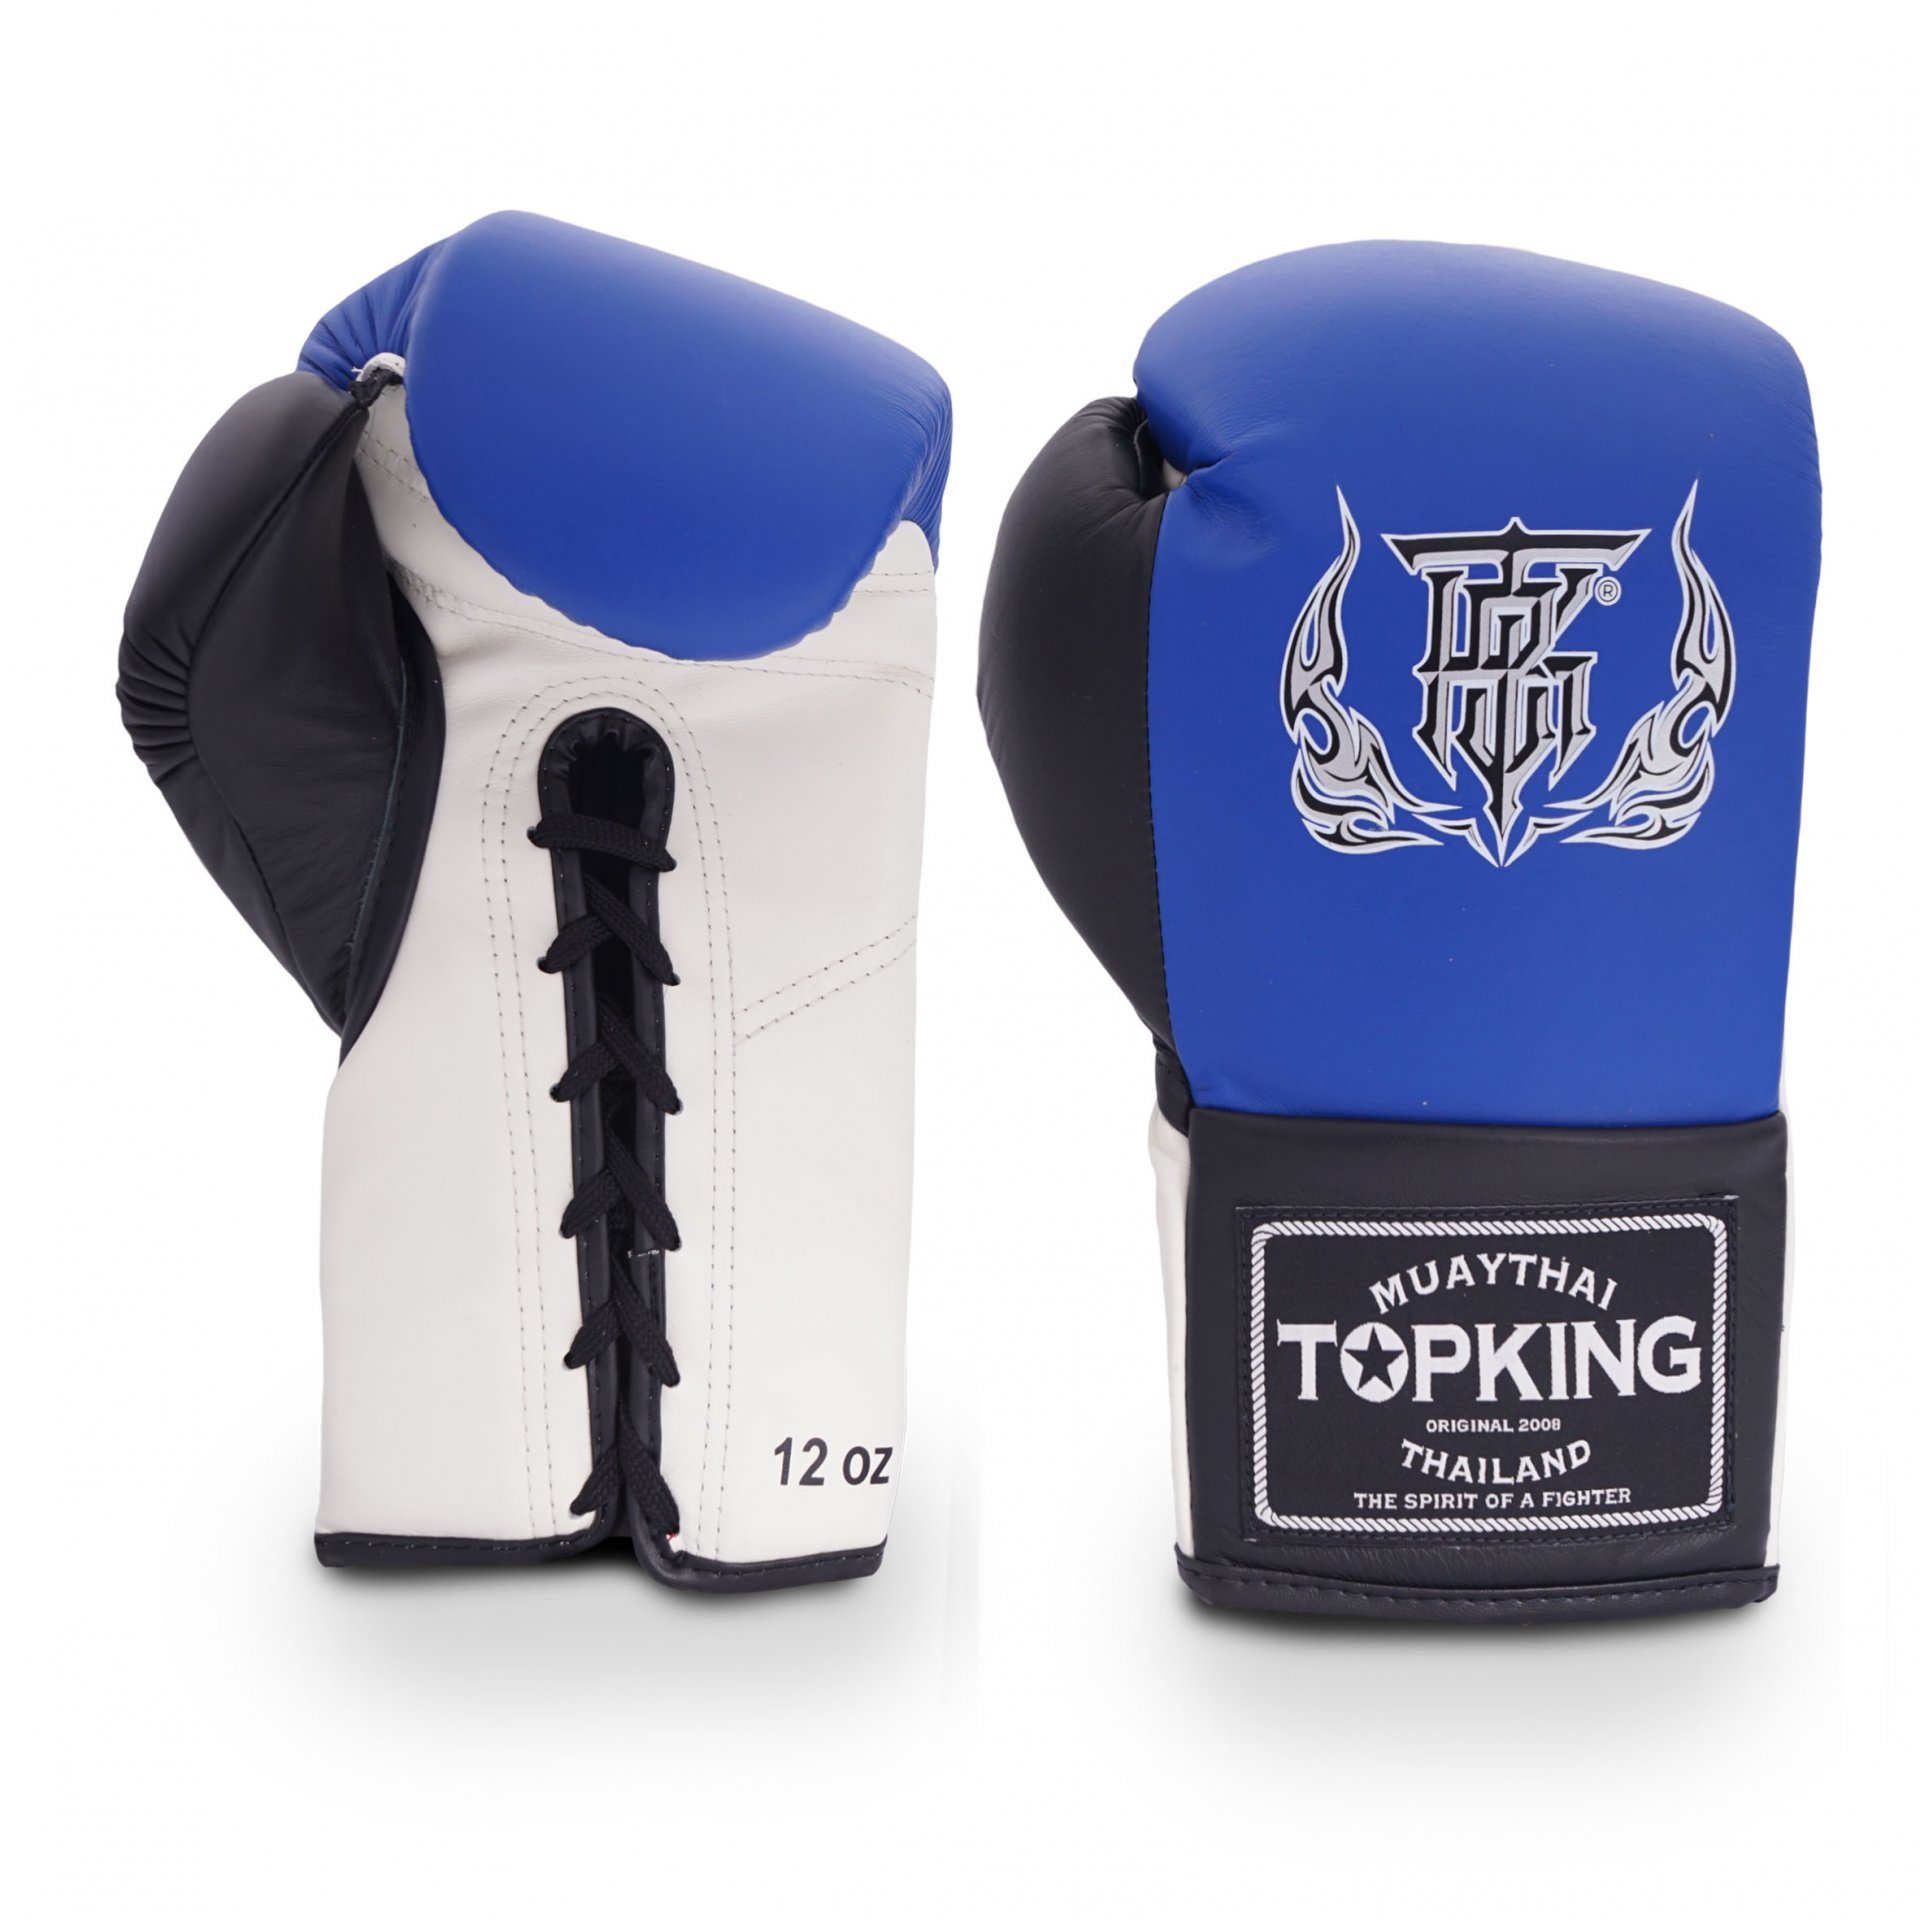 TOPKING GLOVES "COMPETITION" OFFICIAL